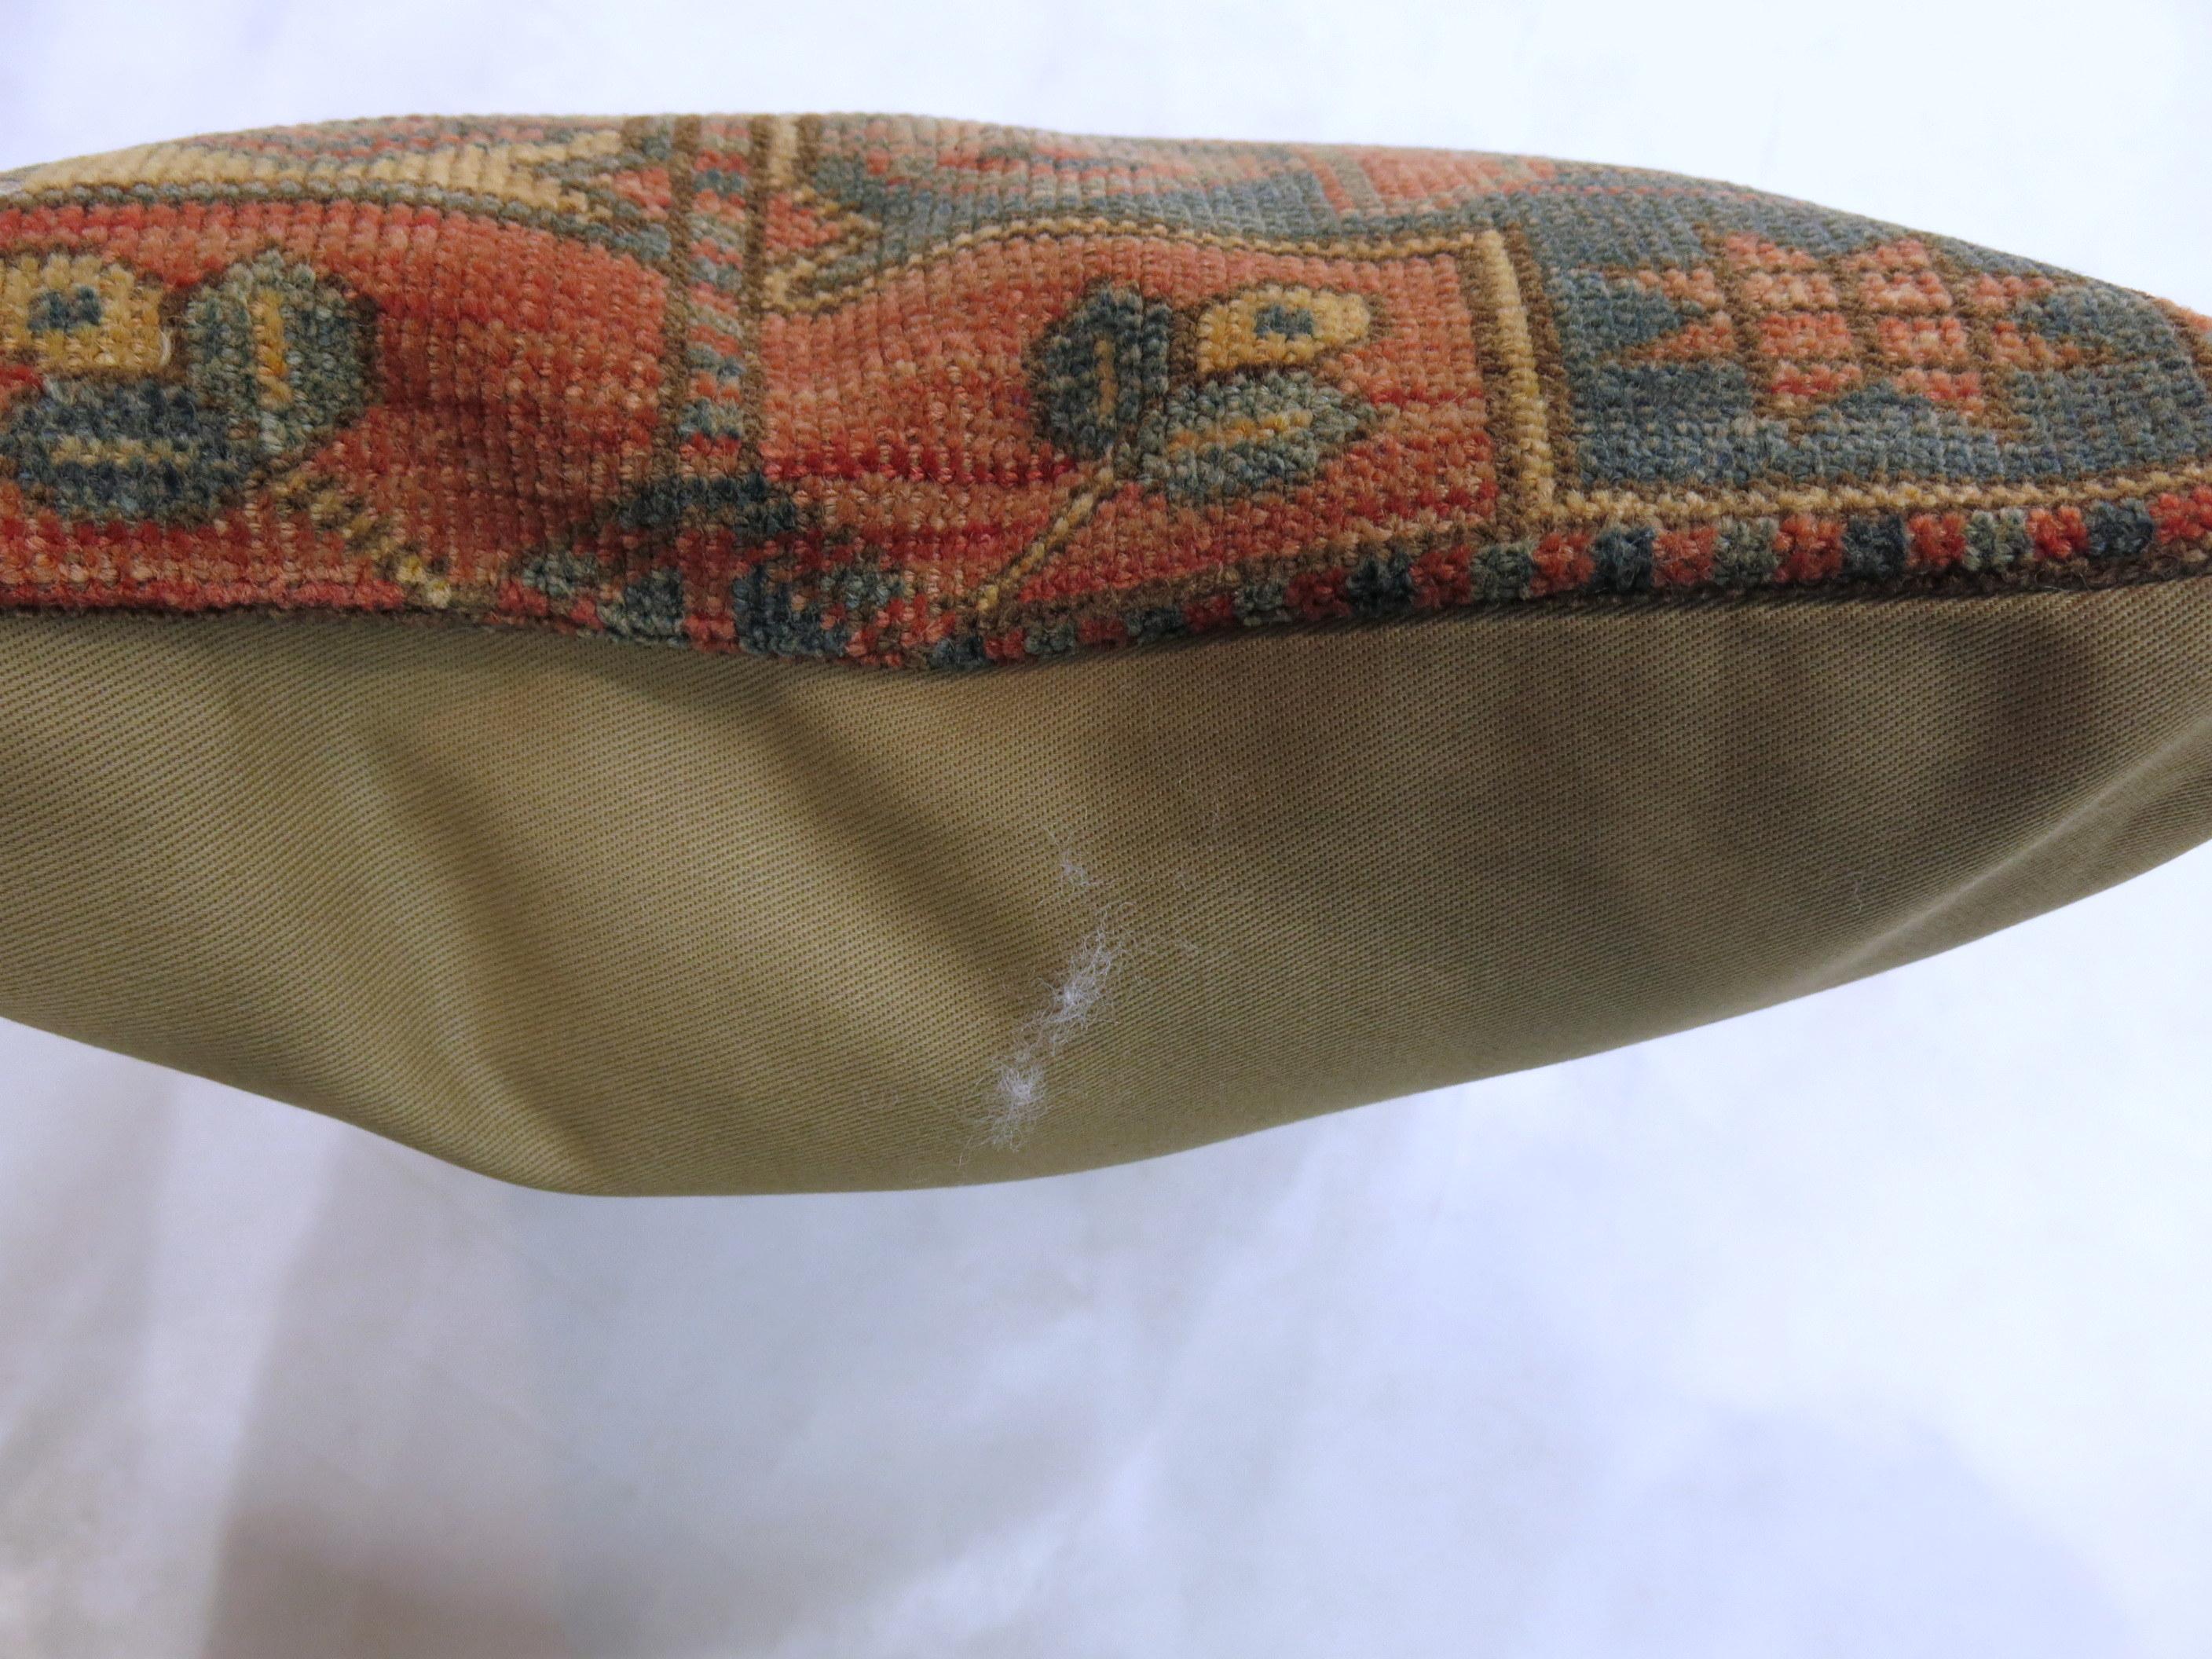 Pillow made from a 19th century antique Ersari rug with cotton back and zipper closure.